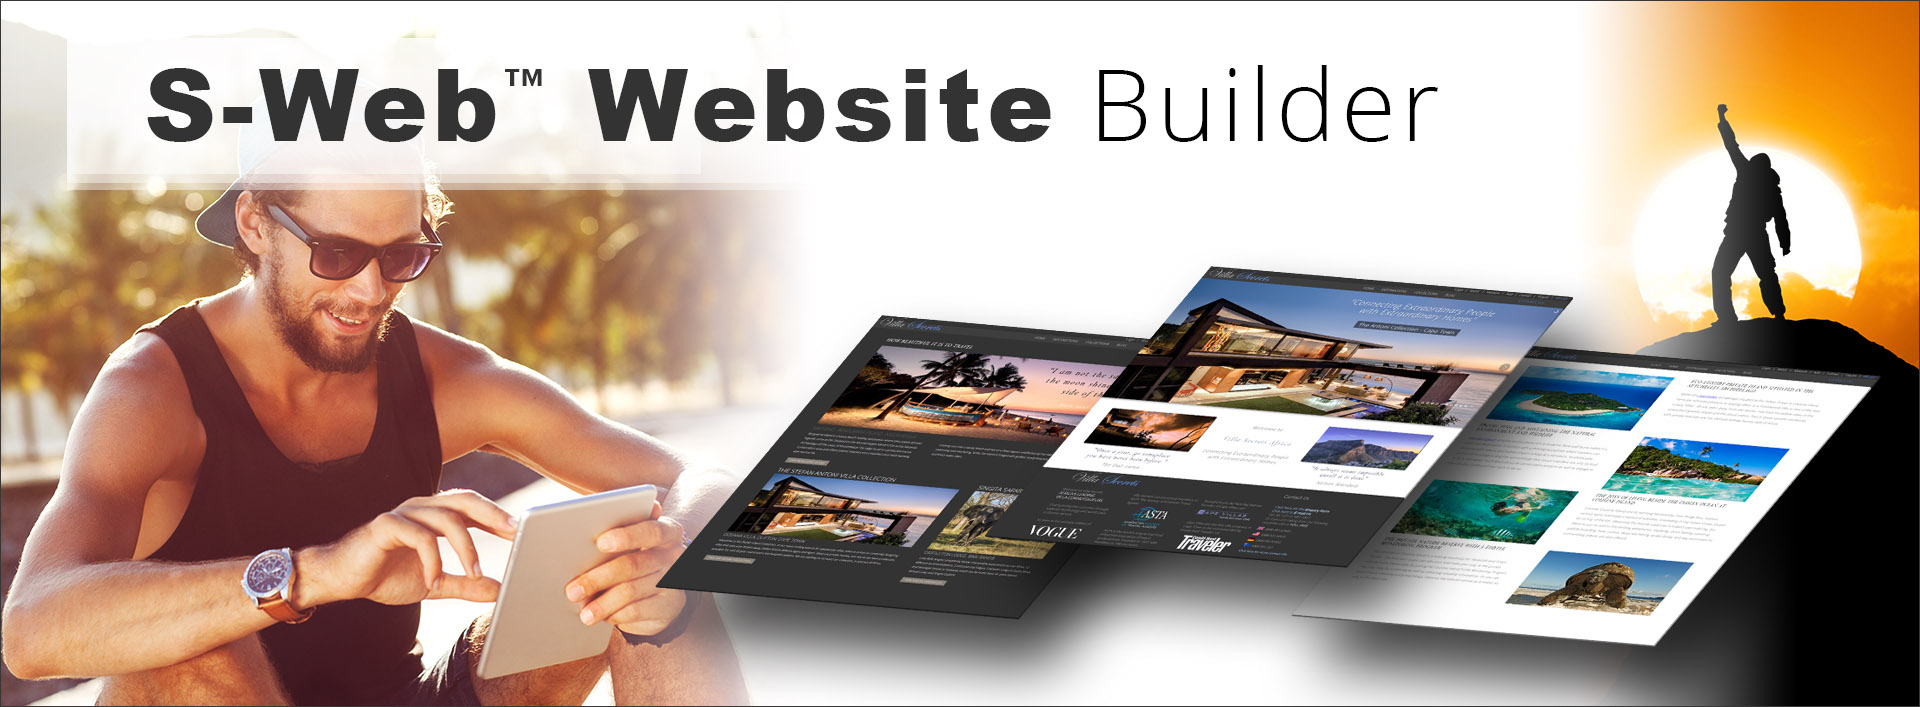 S-Web--Website-Builder__THE-WHAT